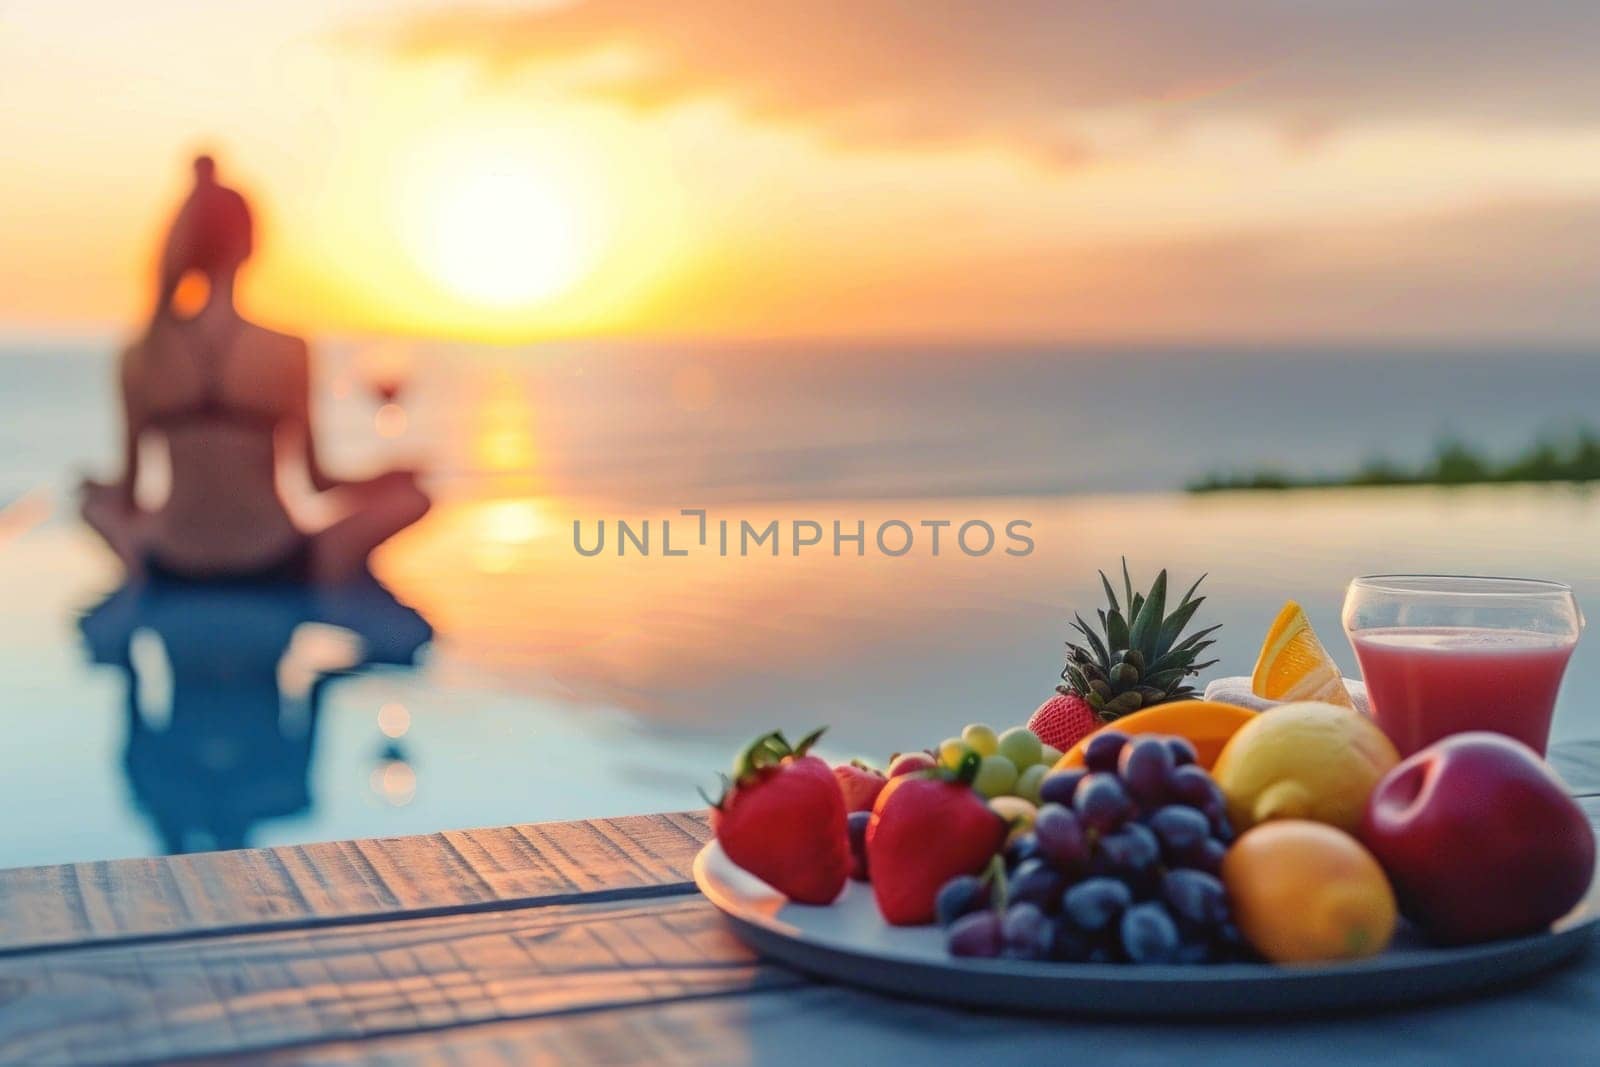 Lifestyle Wellness concept, An image that focuses on healthy fruit and vegetable juices with a background women and sea by golfmerrymaker